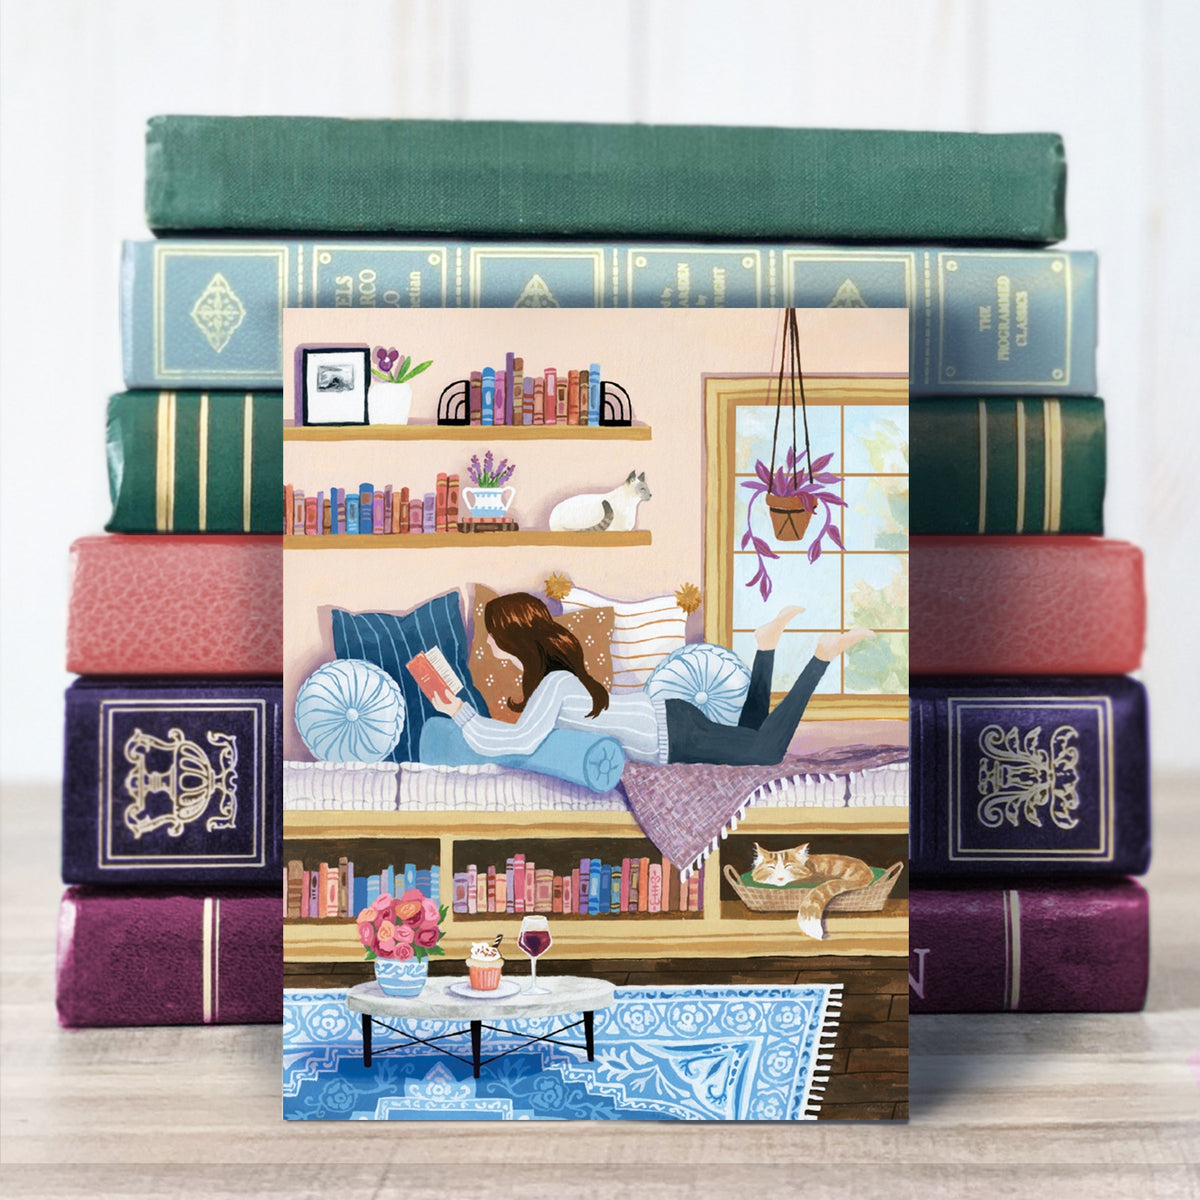 Cozy Library Birthday Card - Heart of the Home LV